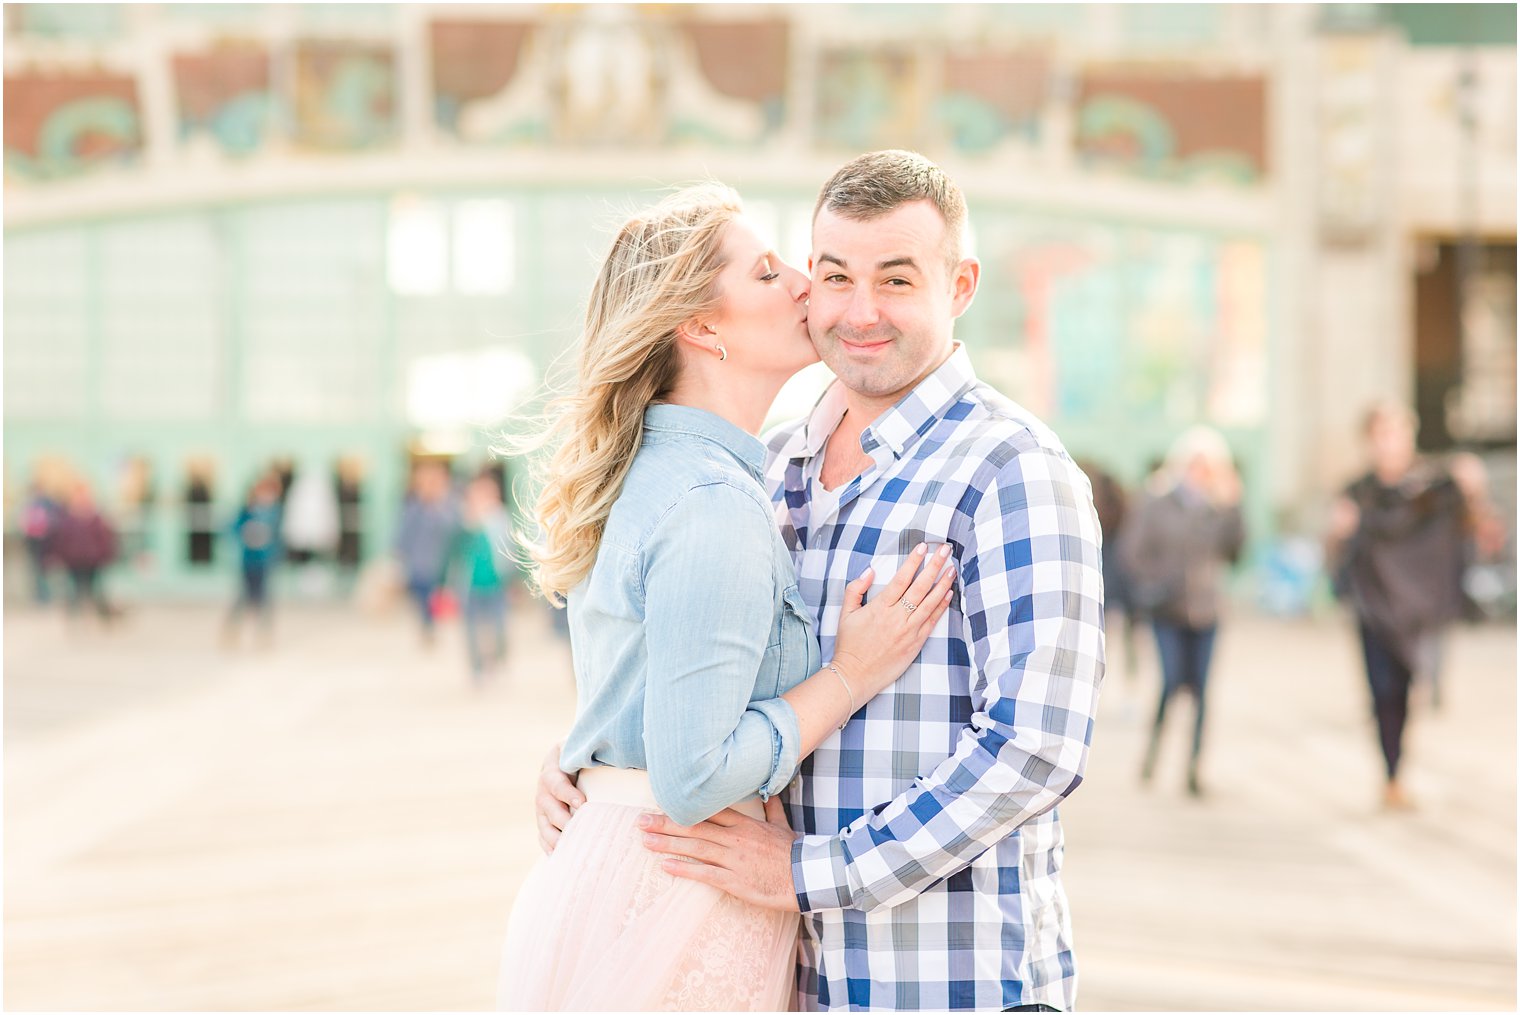 Funny engagement photo on the boardwalk in Asbury Park, NJ